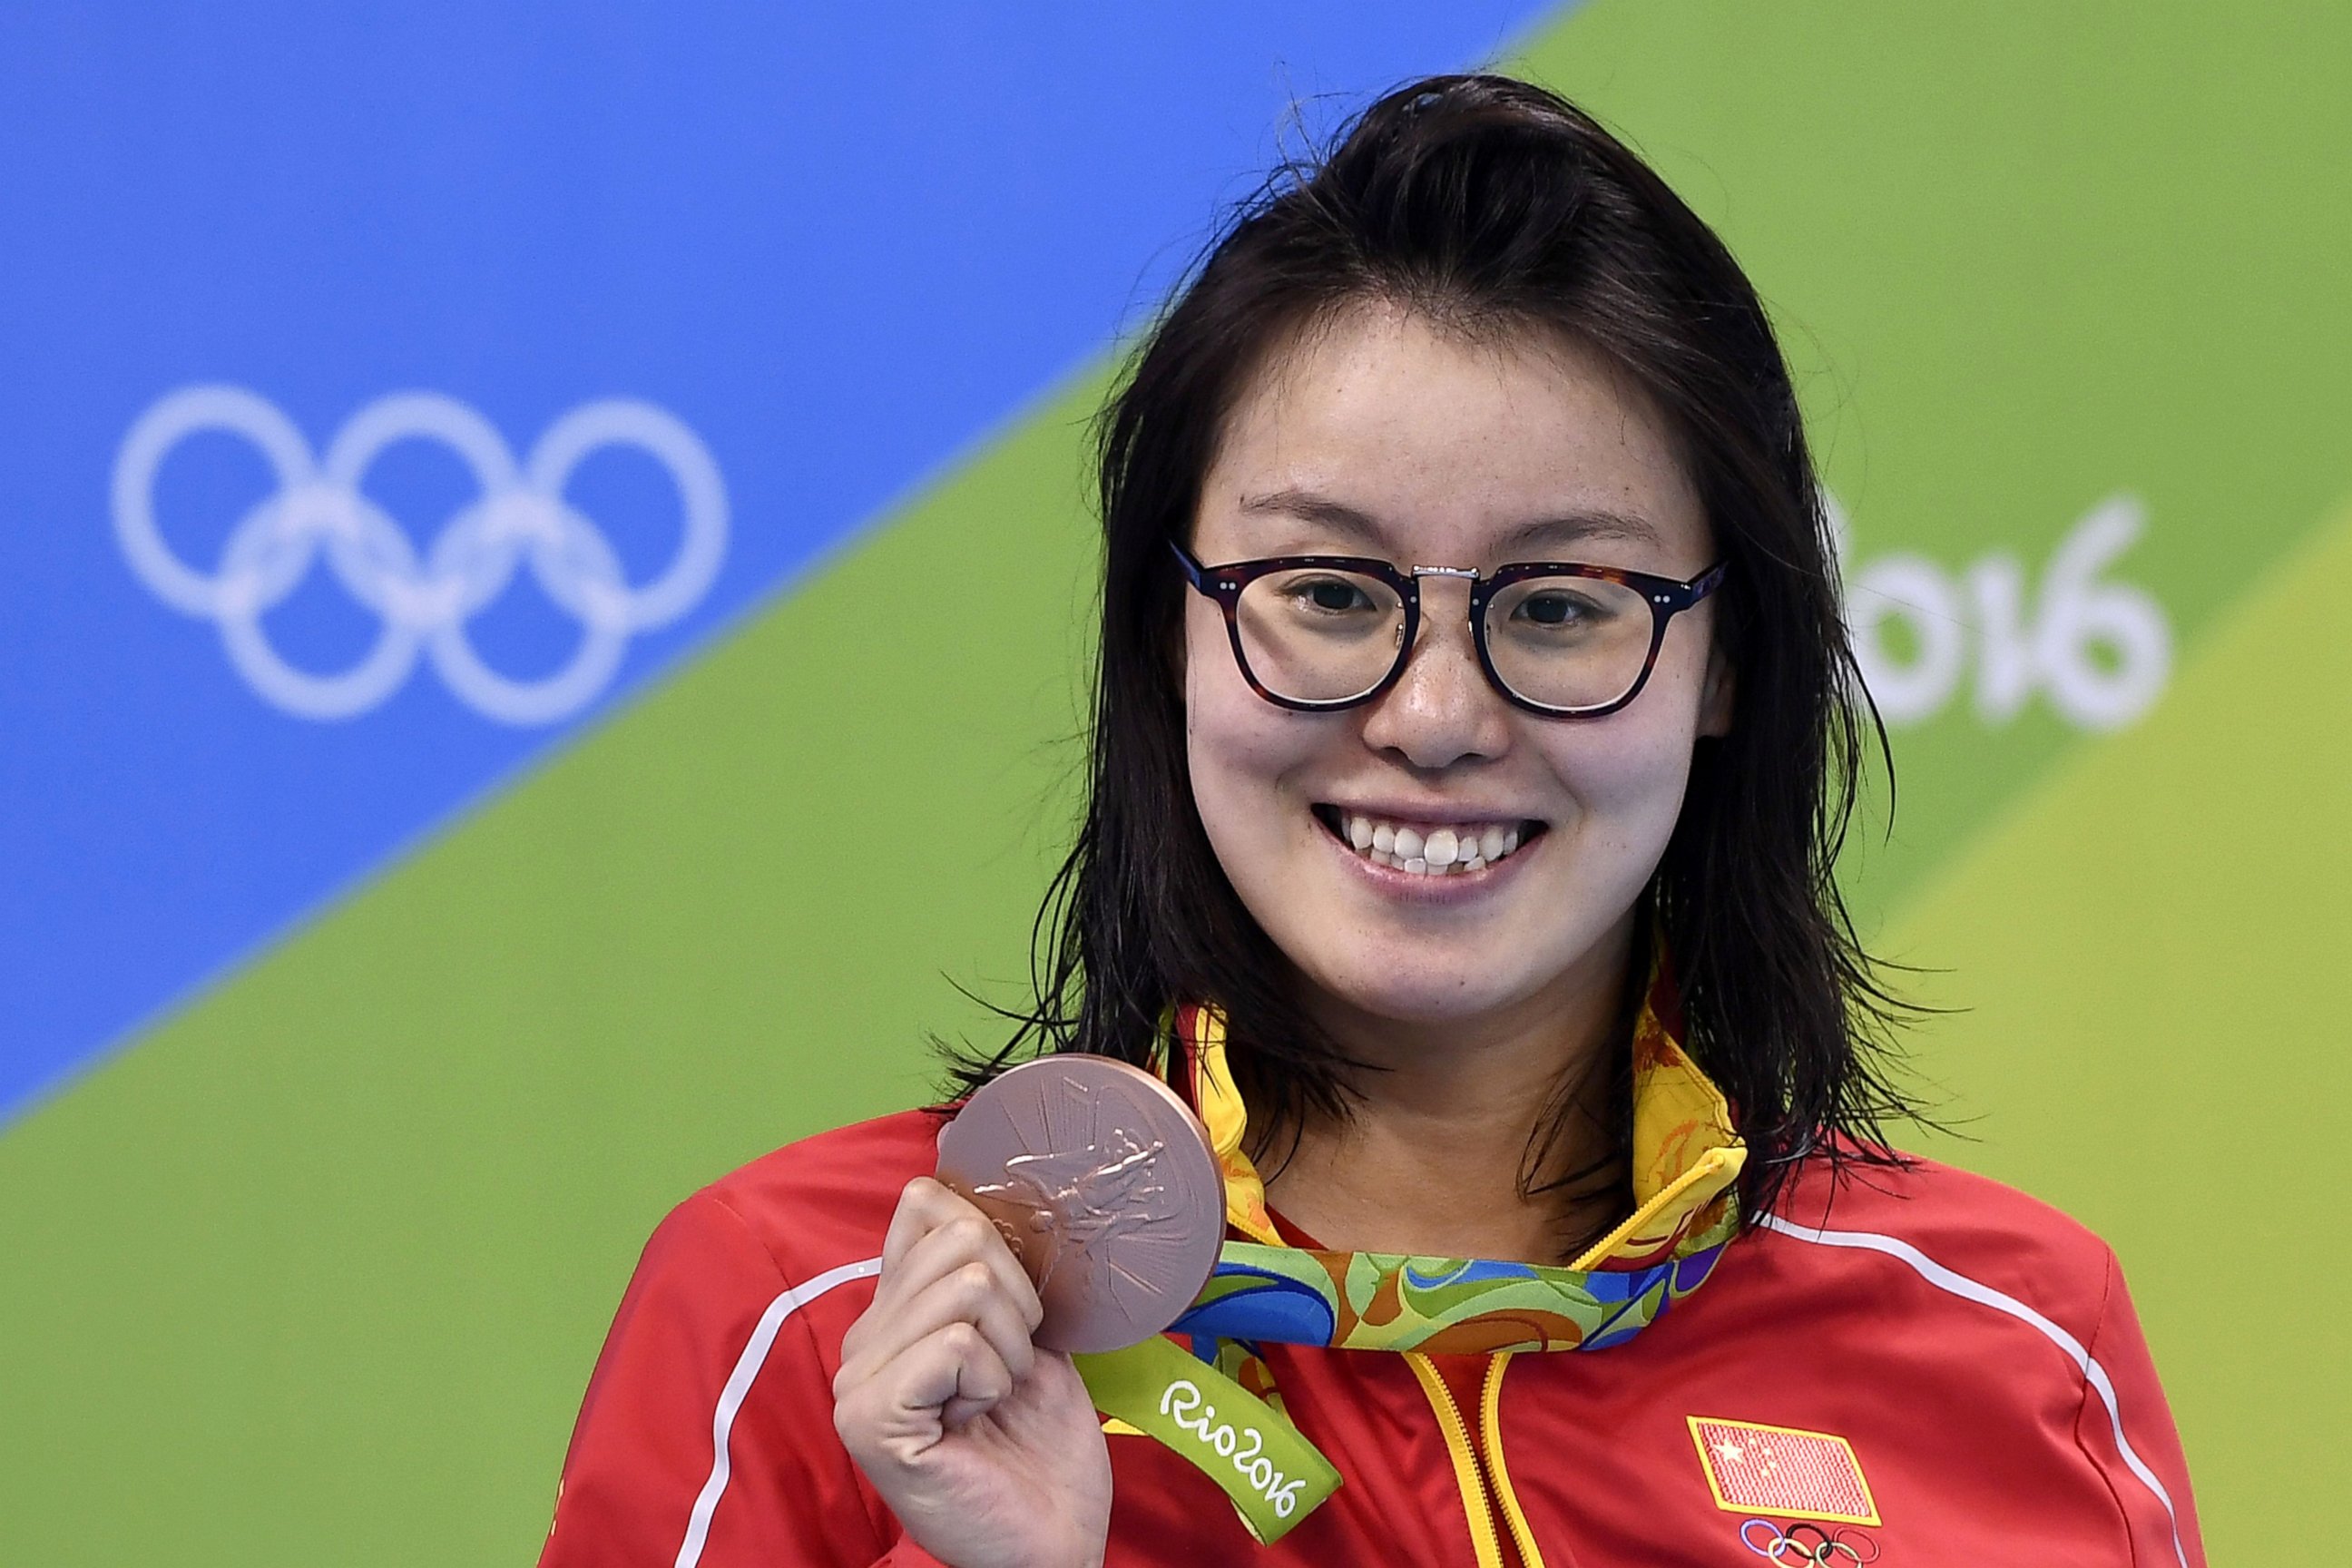 PHOTO: China's Fu Yuanhui poses with her bronze medal on the podium of the Women's 100m Backstroke during the swimming event at the Rio 2016 Olympic Games at the Olympic Aquatics Stadium in Rio de Janeiro, Aug. 8, 2016.